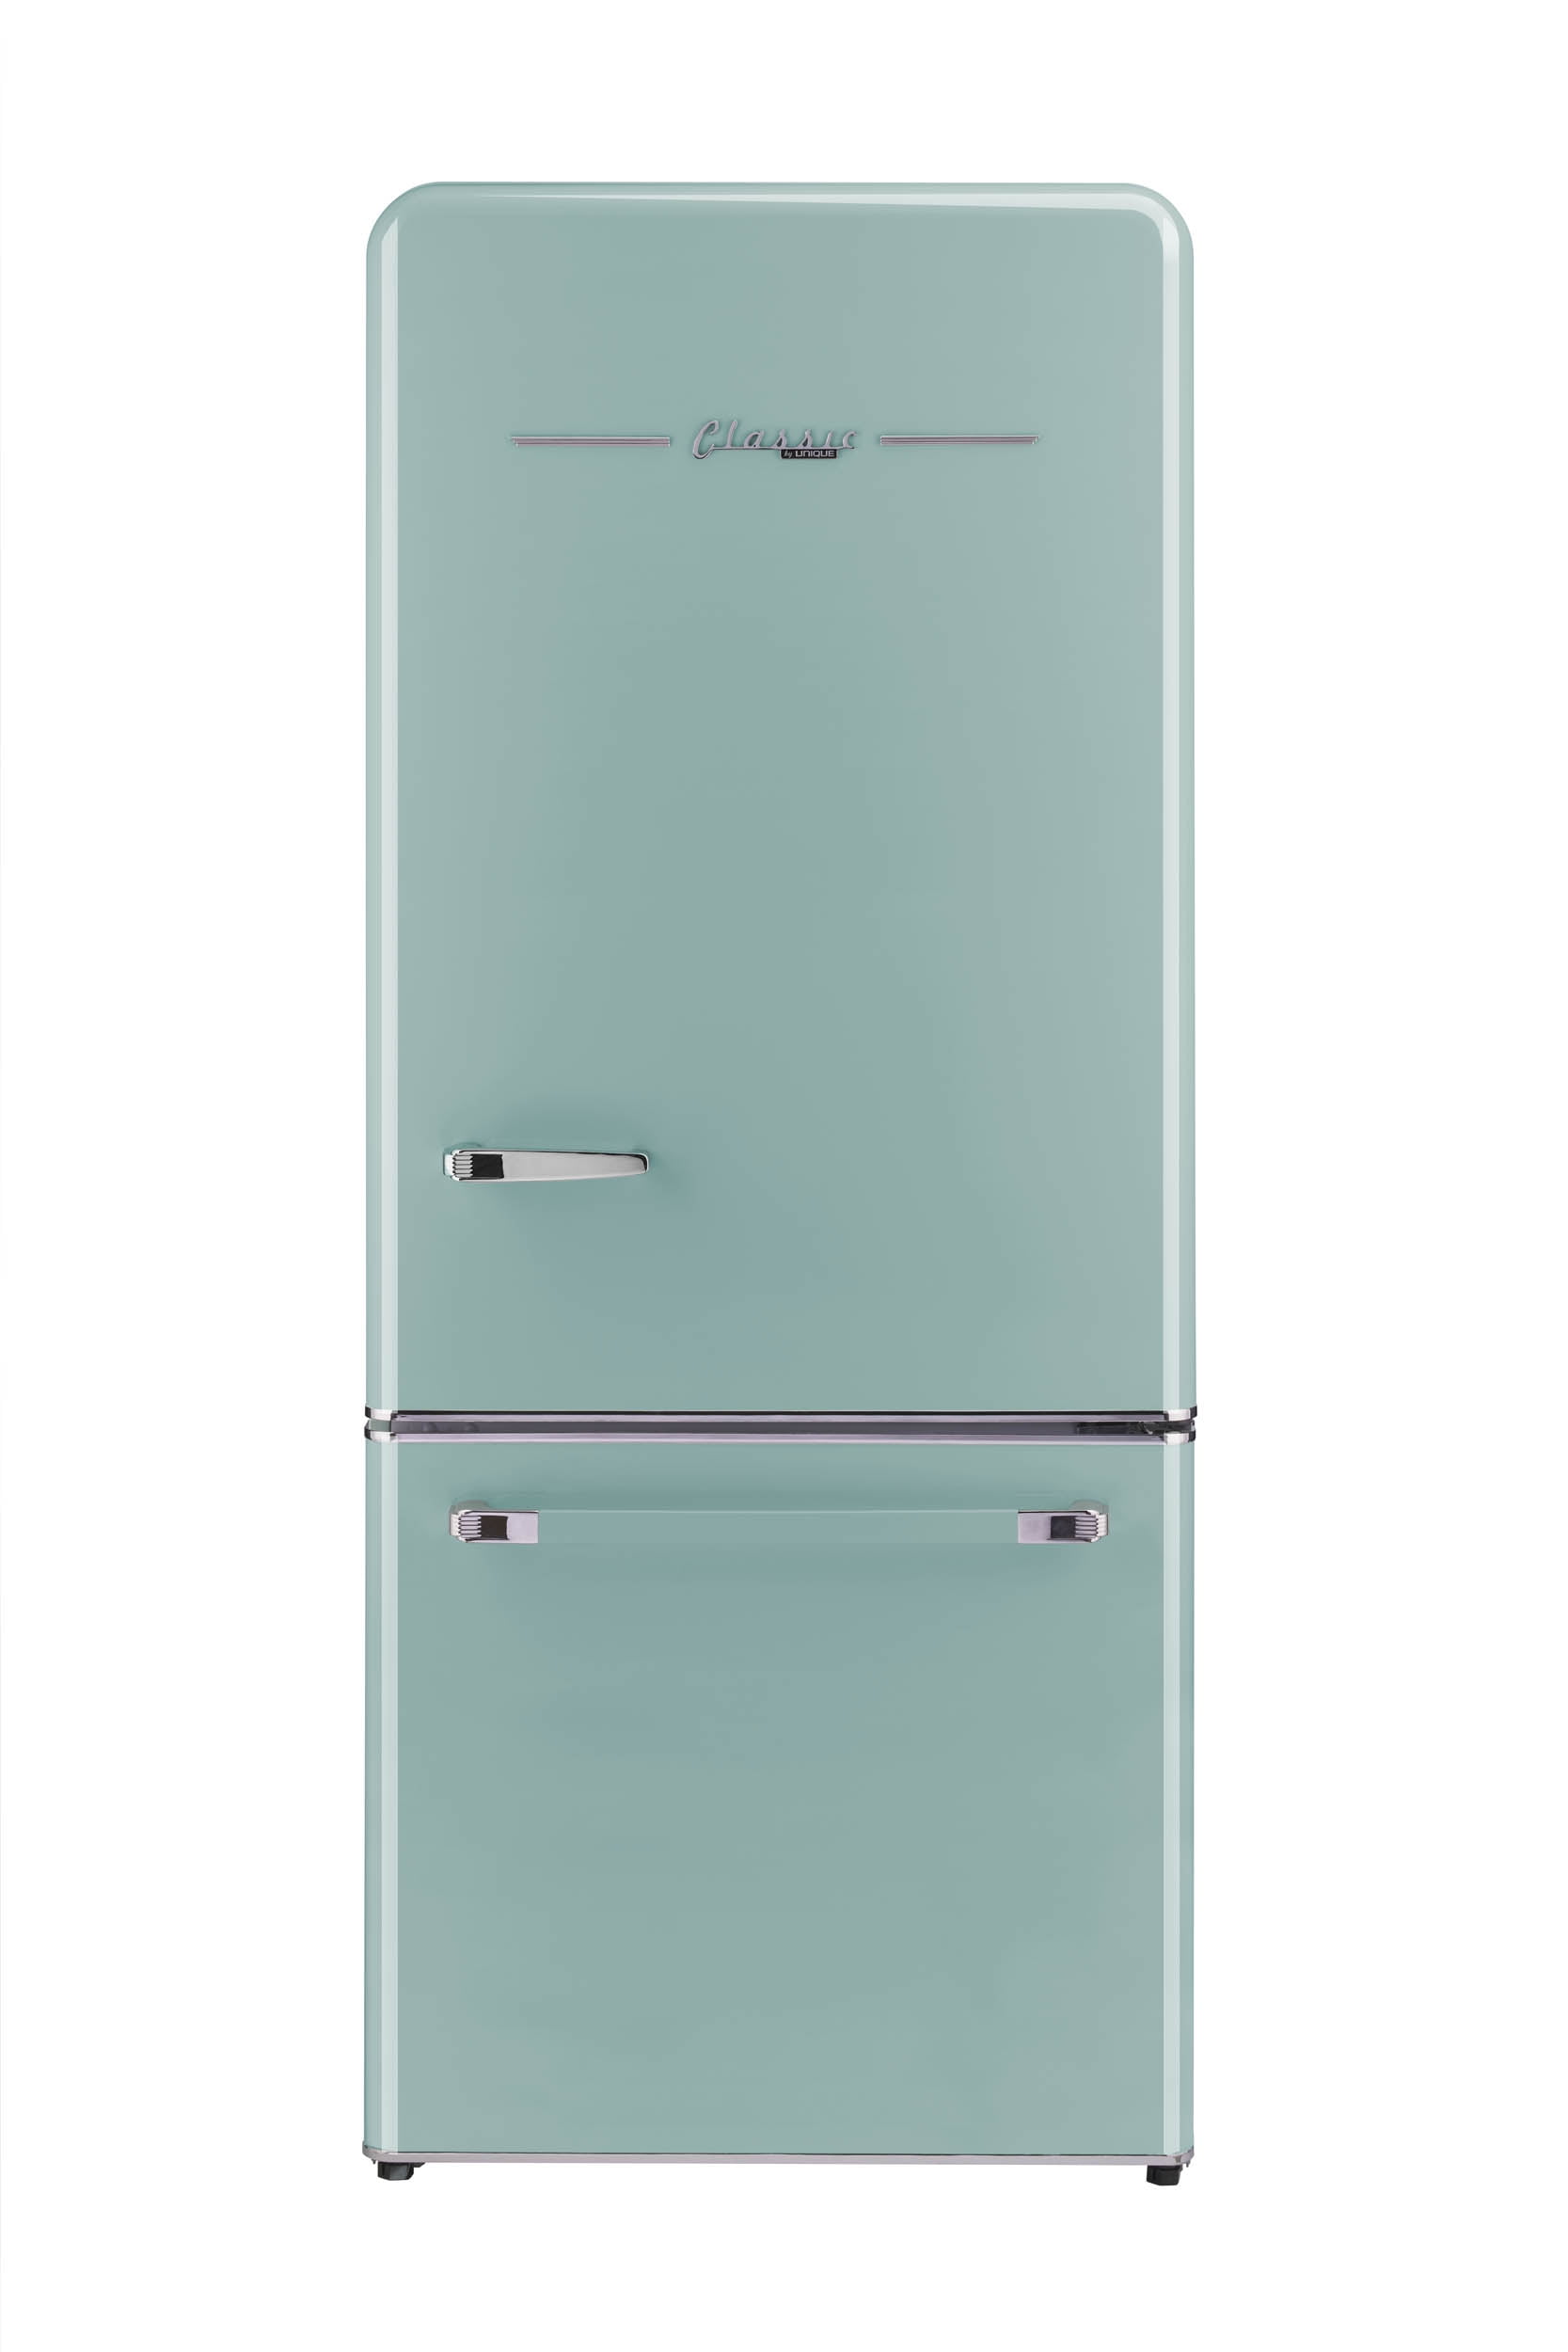 Unique Appliances Classic Retro 30 in 17.7 cu. ft. Frost Free Retro Bottom  Freezer Refrigerator in Marshmallow White, ENERGY STAR UGP-510L W AC - The  Home Depot